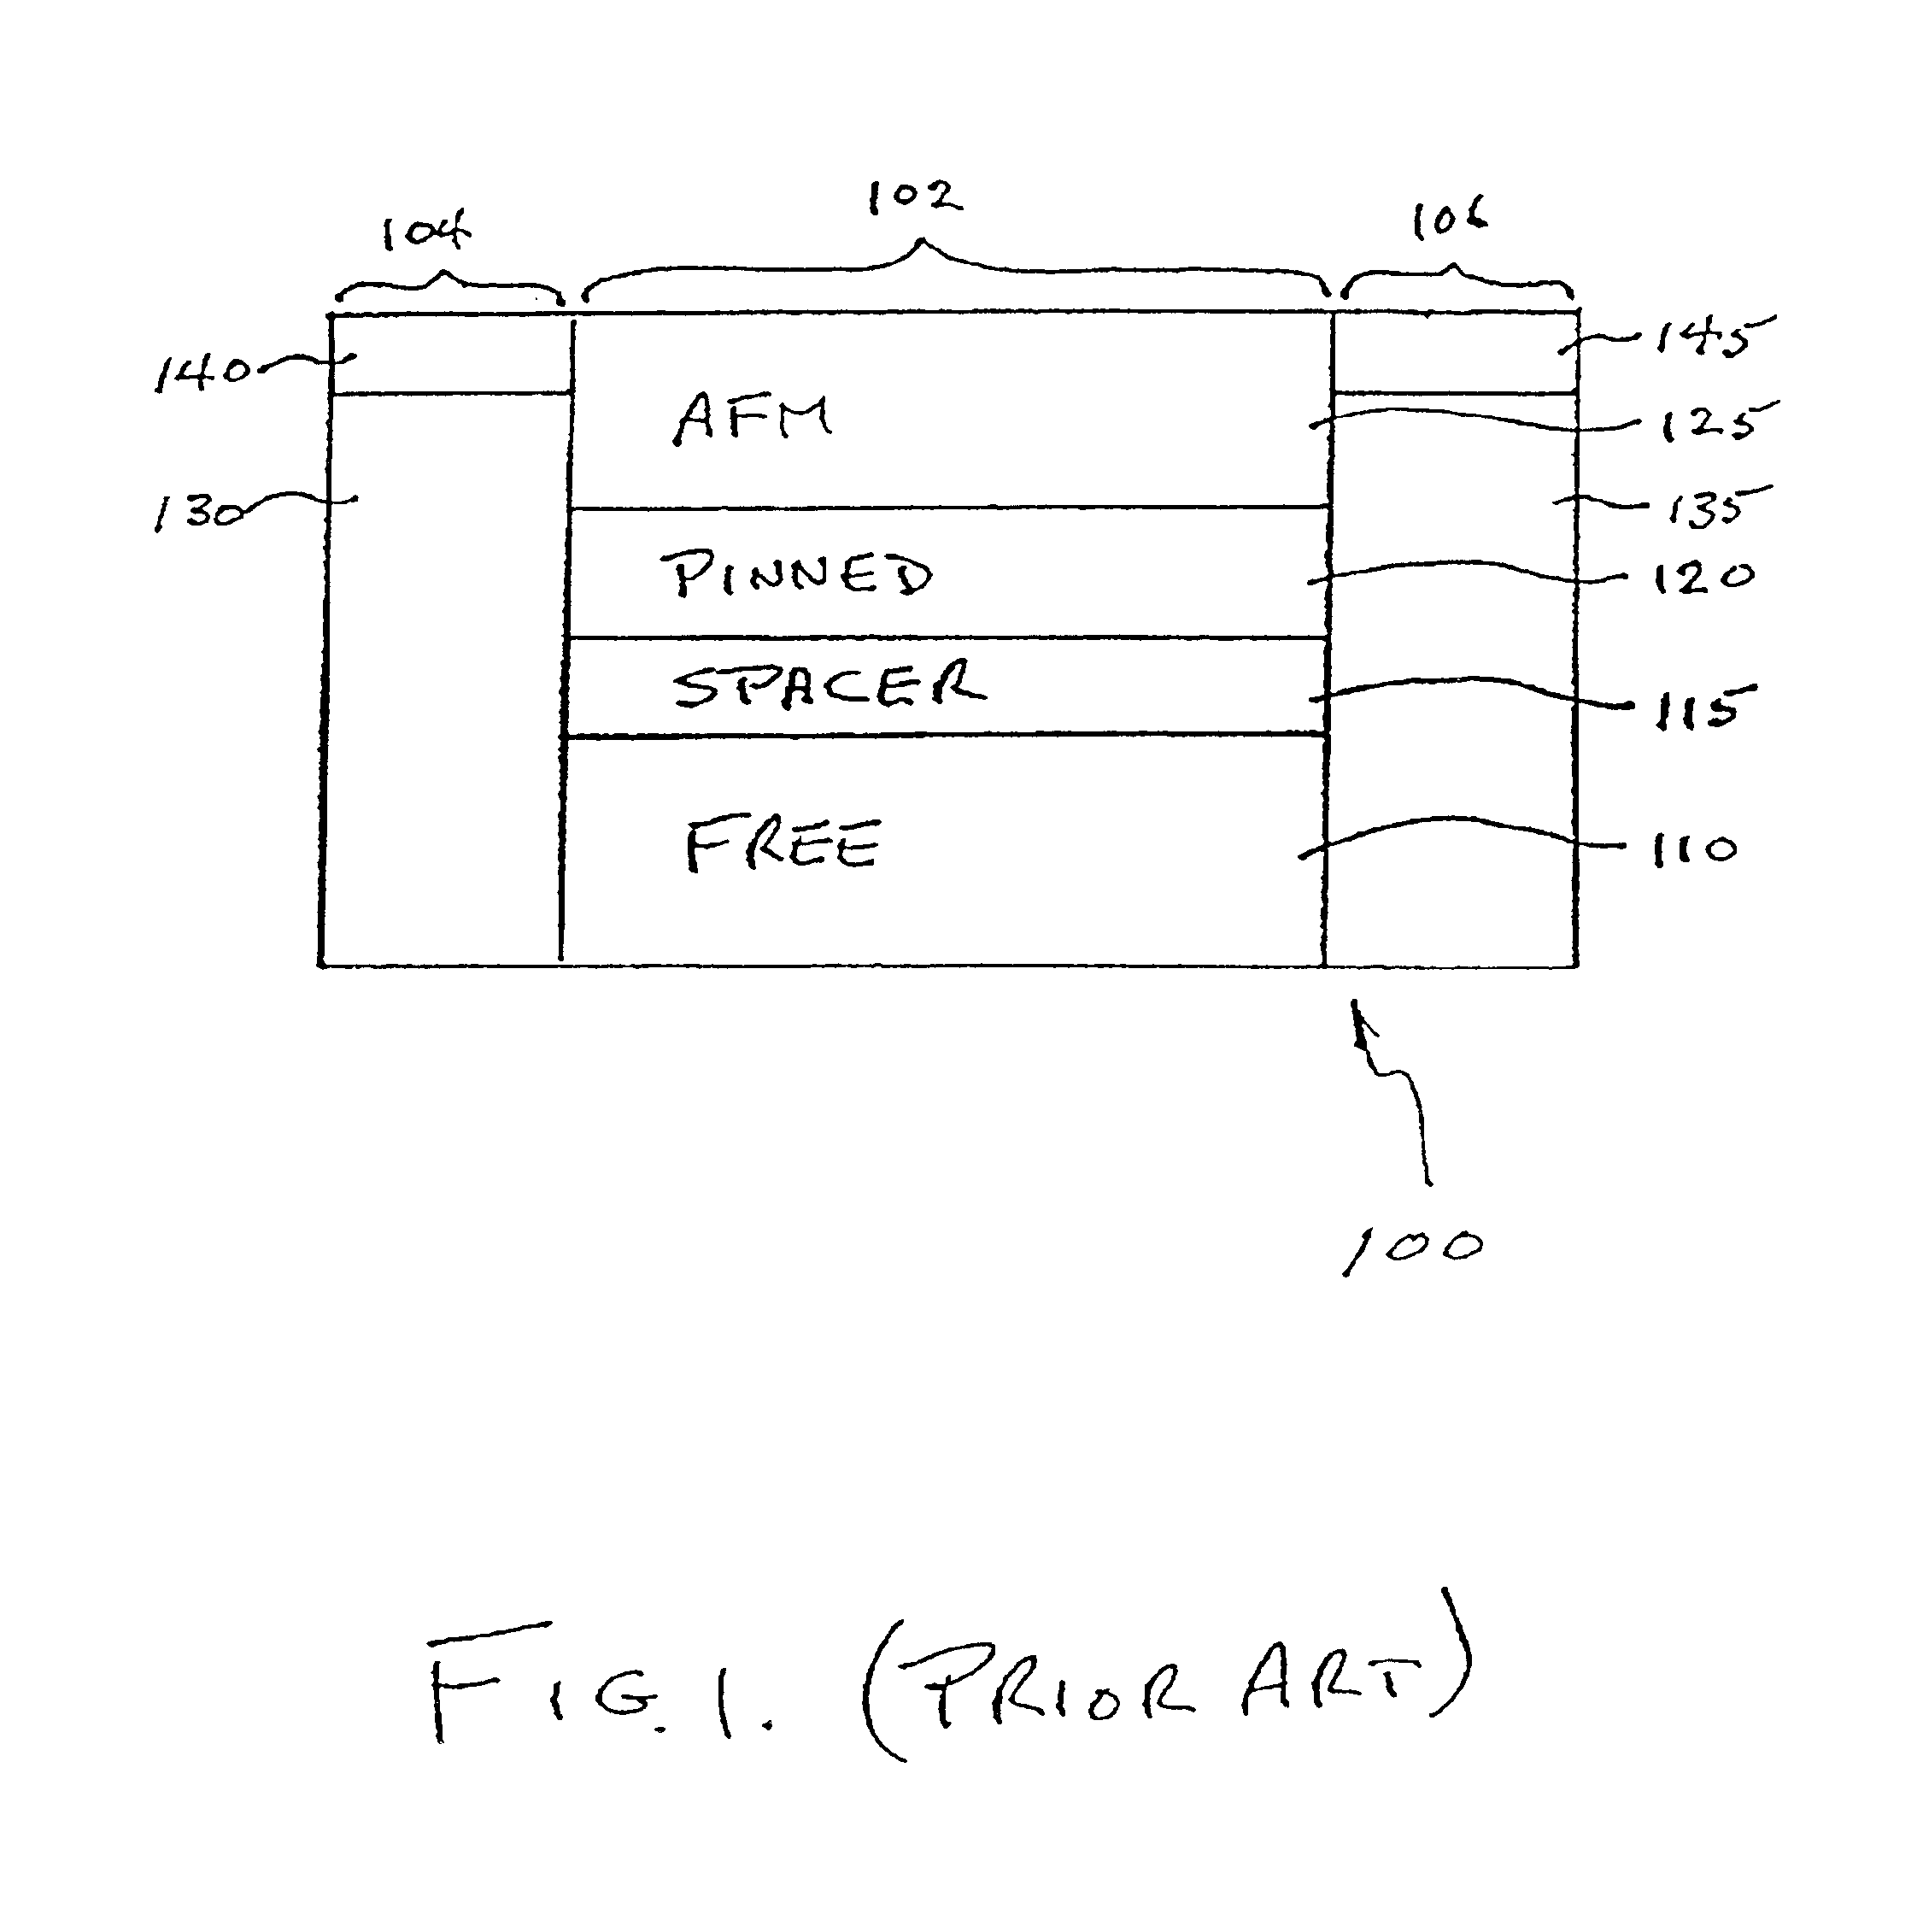 Dual magnetic tunnel junction sensor with a longitudinal bias stack